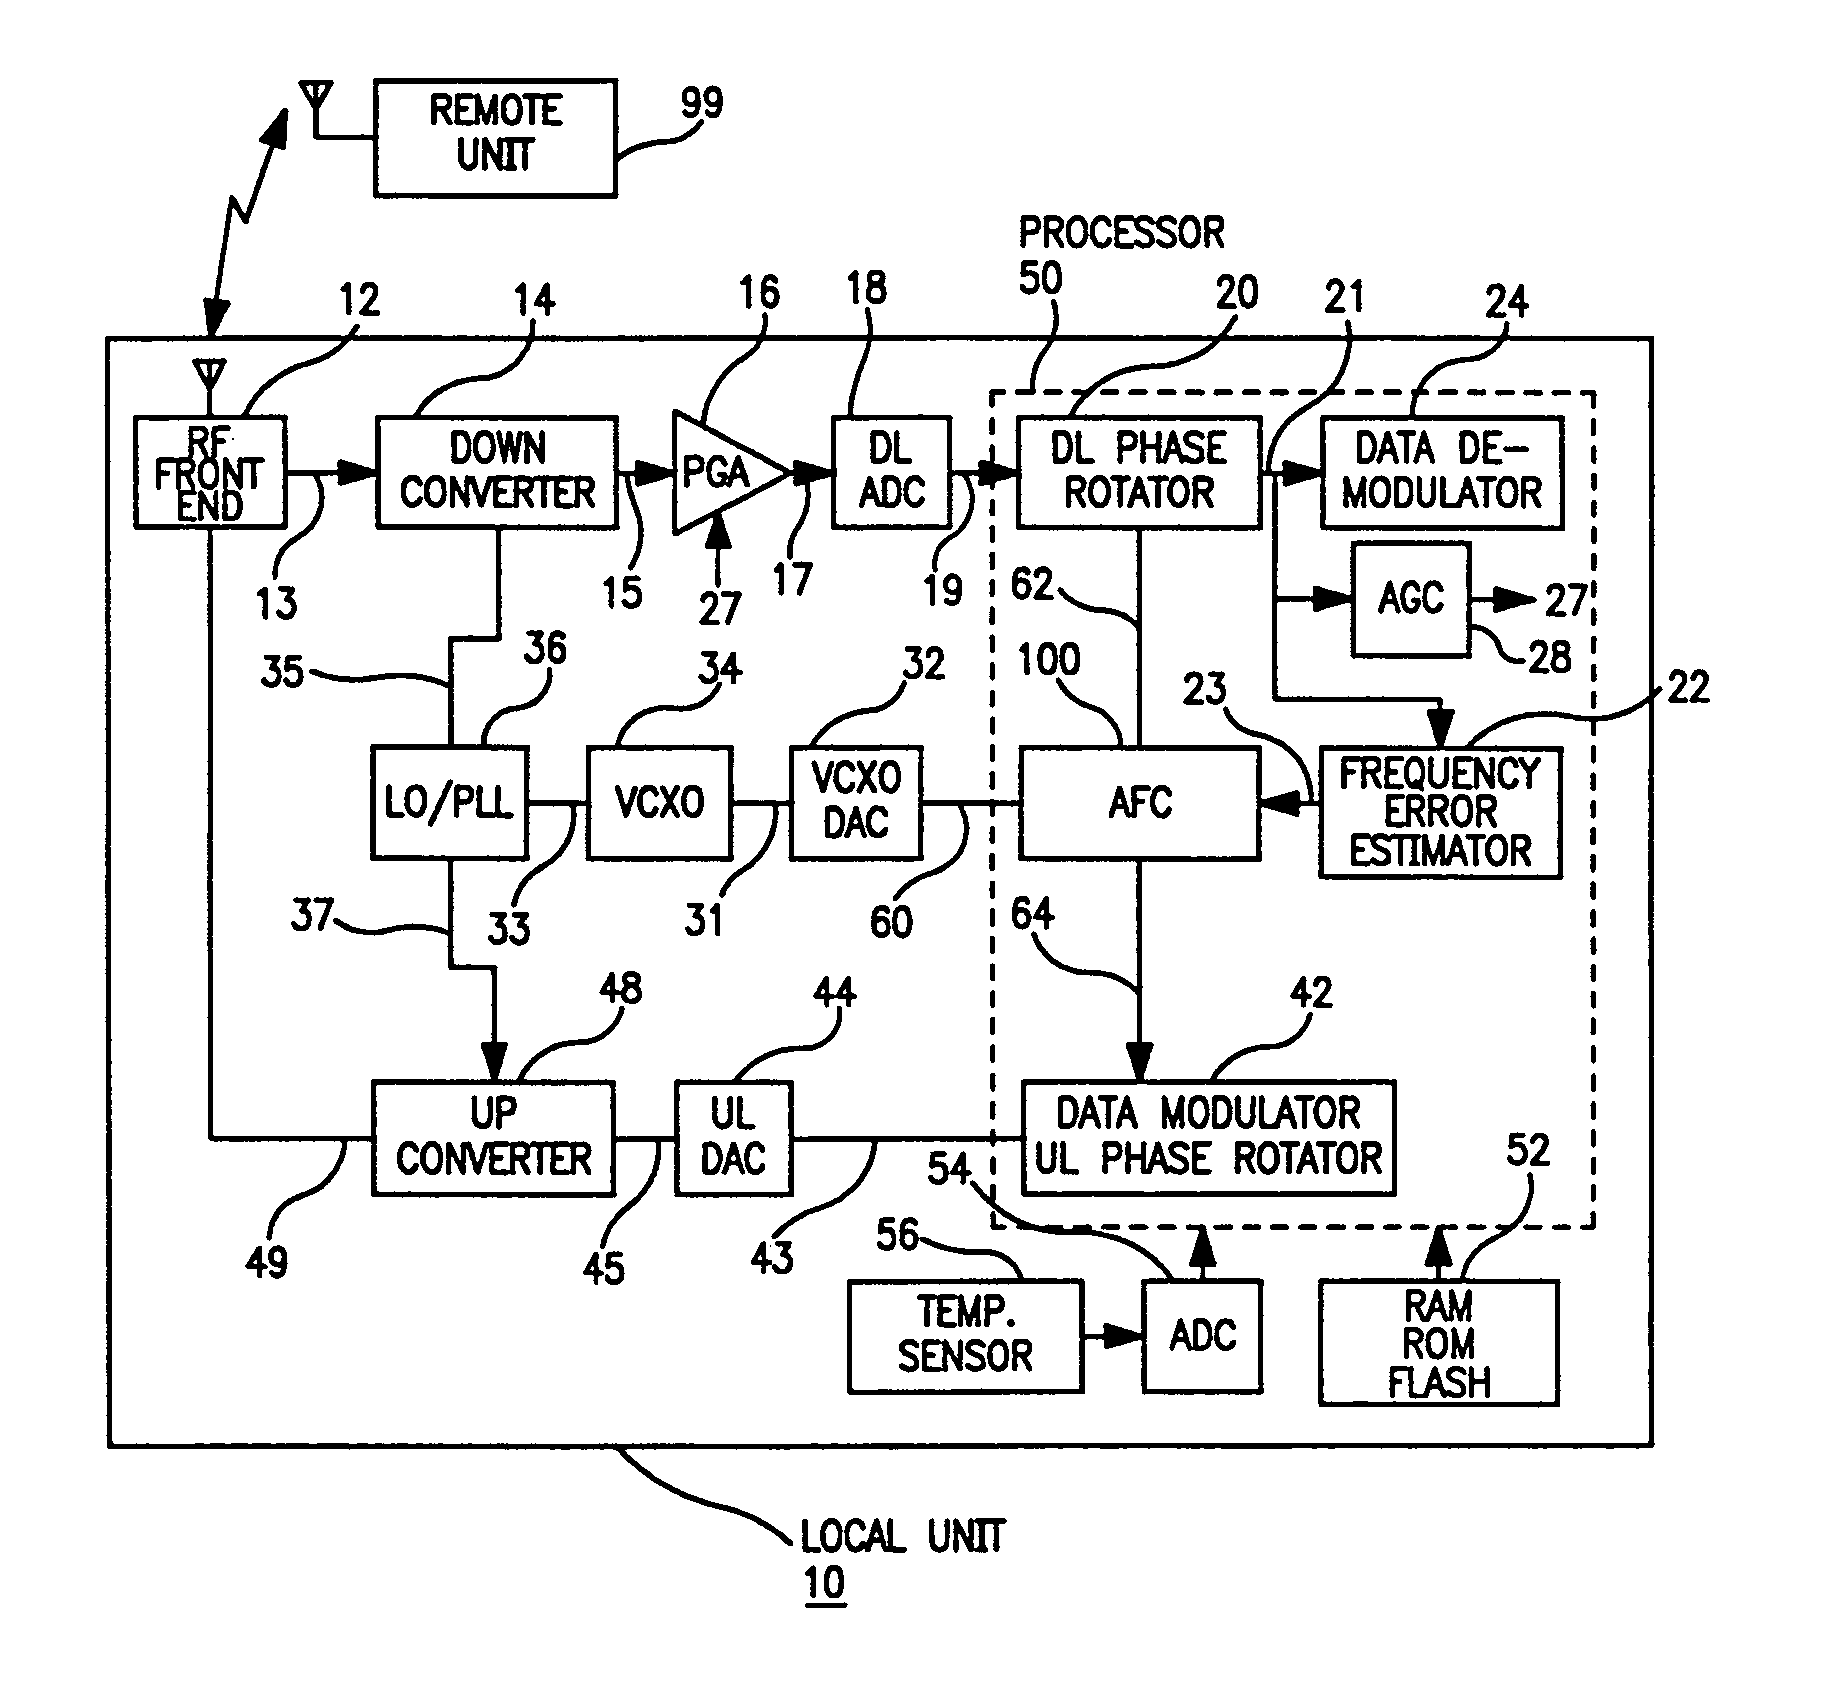 Radio frequency control for communication systems